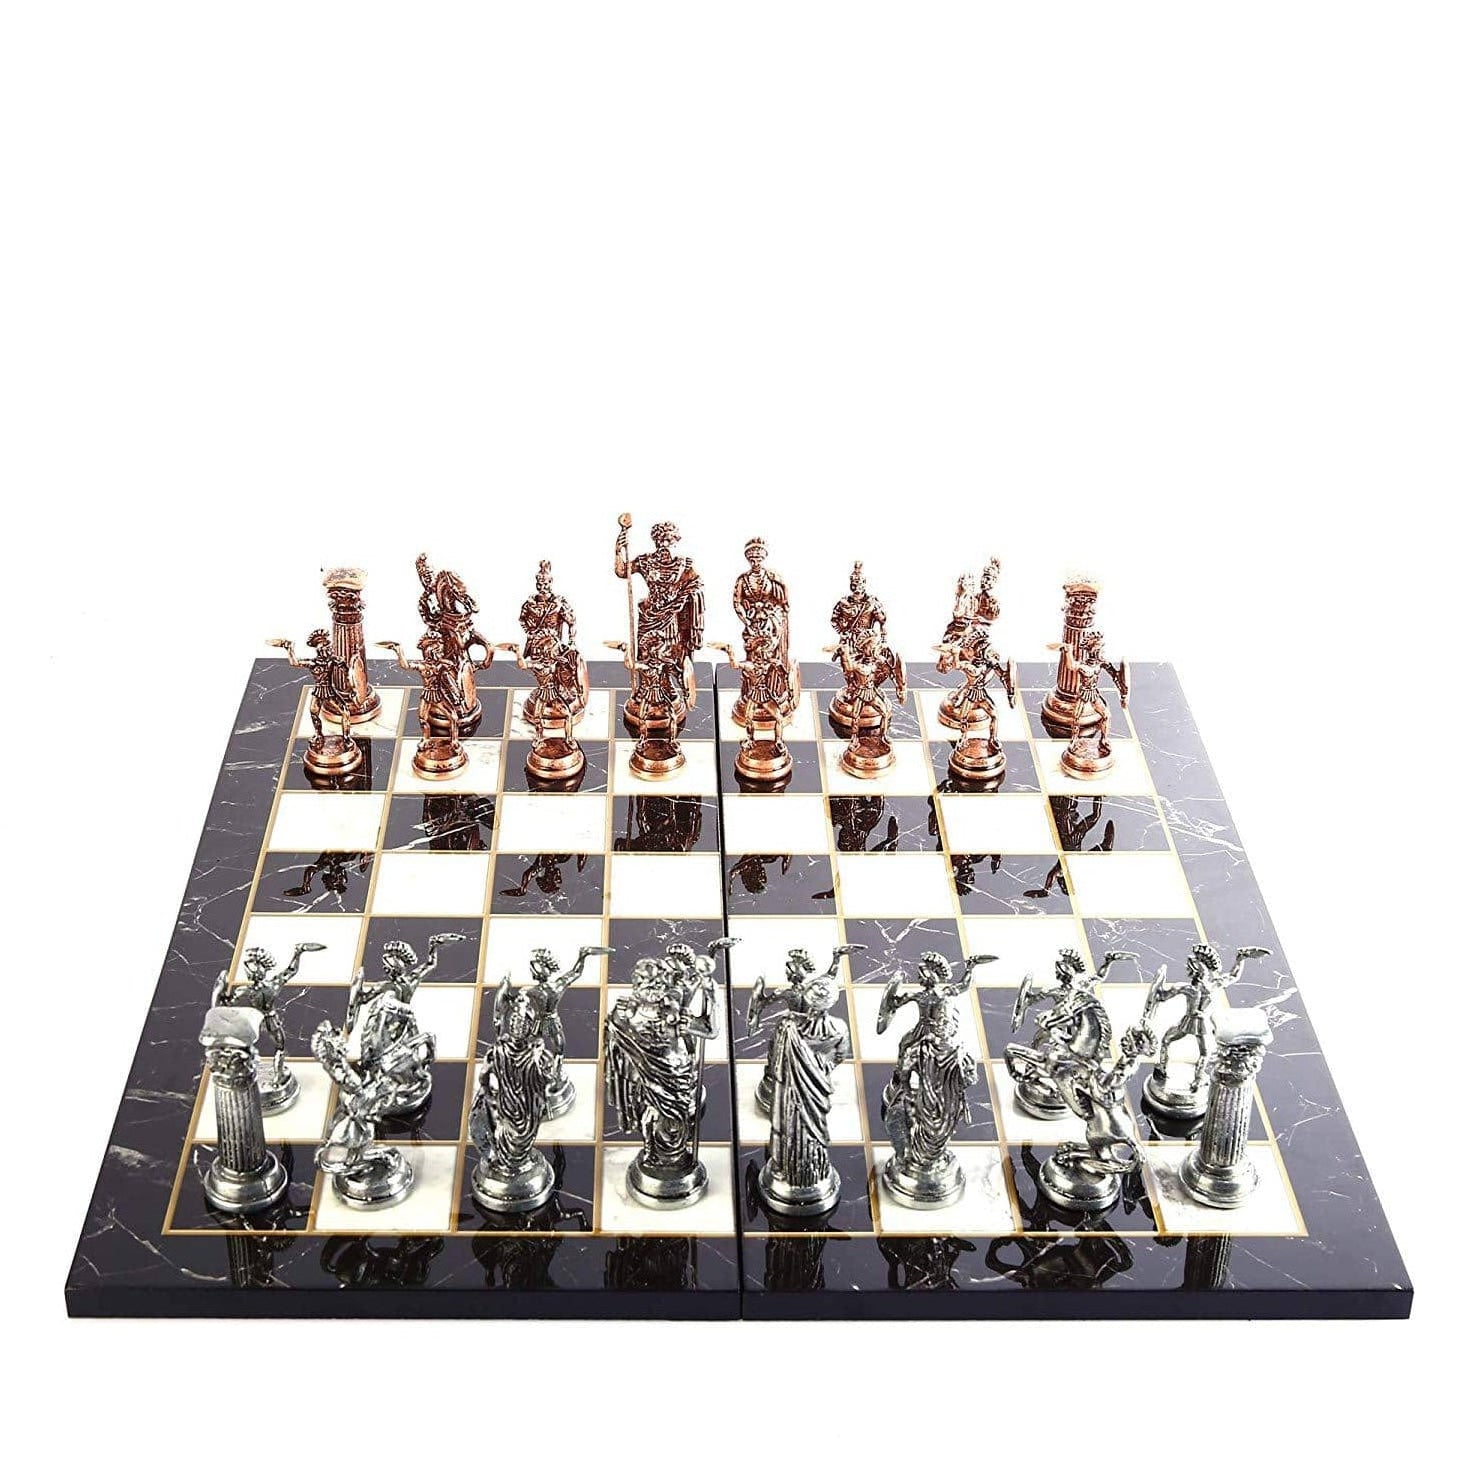 Fine Finish Antique Chess Board | Marble Look Board | Antique Roman Chess Pieces | whatagift.com.au.